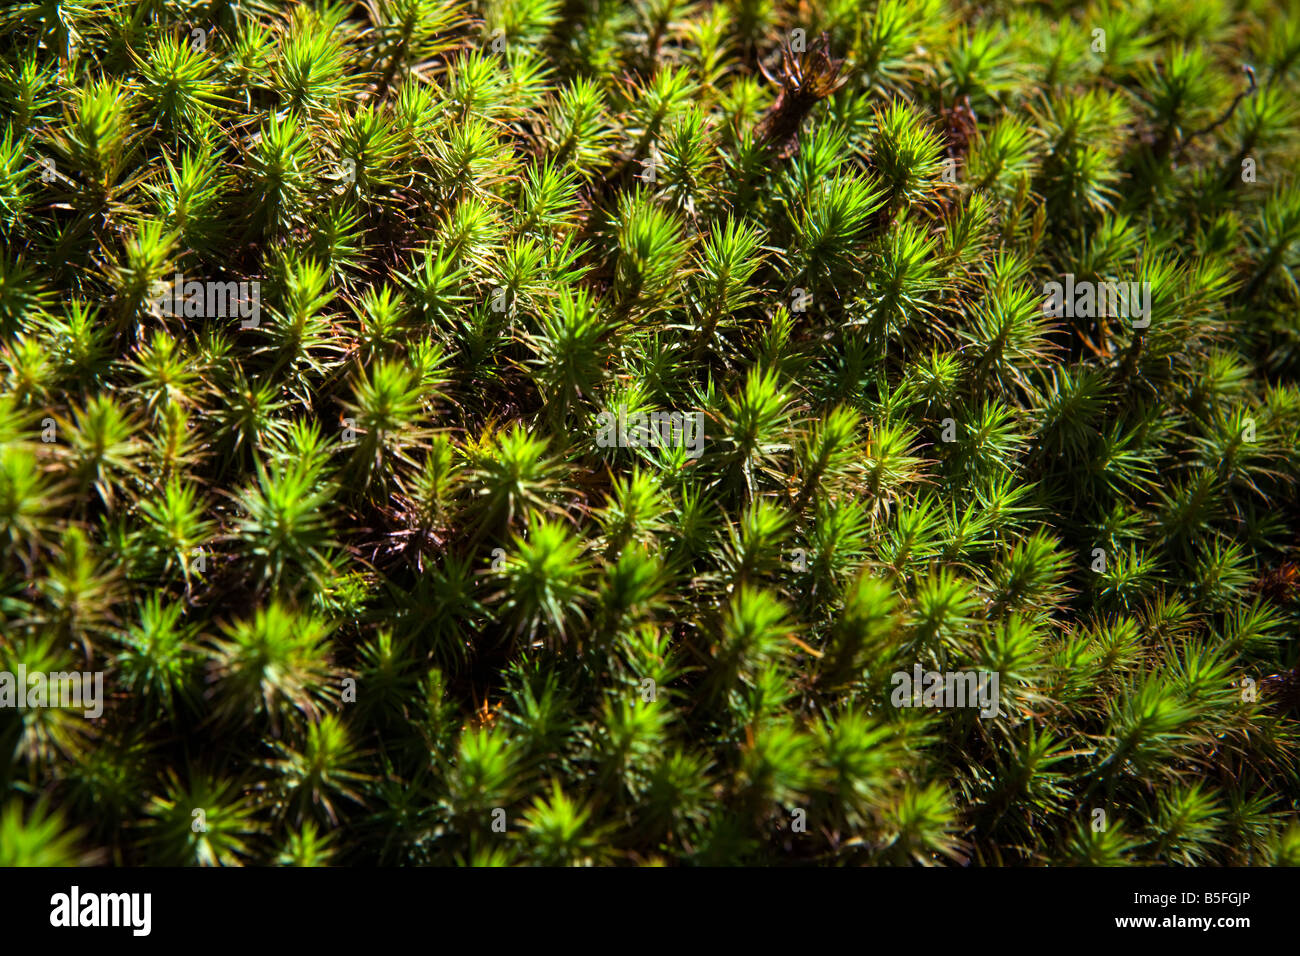 Close up macro shot of small green tree like plants growing in a group, Old Rag Mountain, Shenandoah National Park, Virginia. Stock Photo